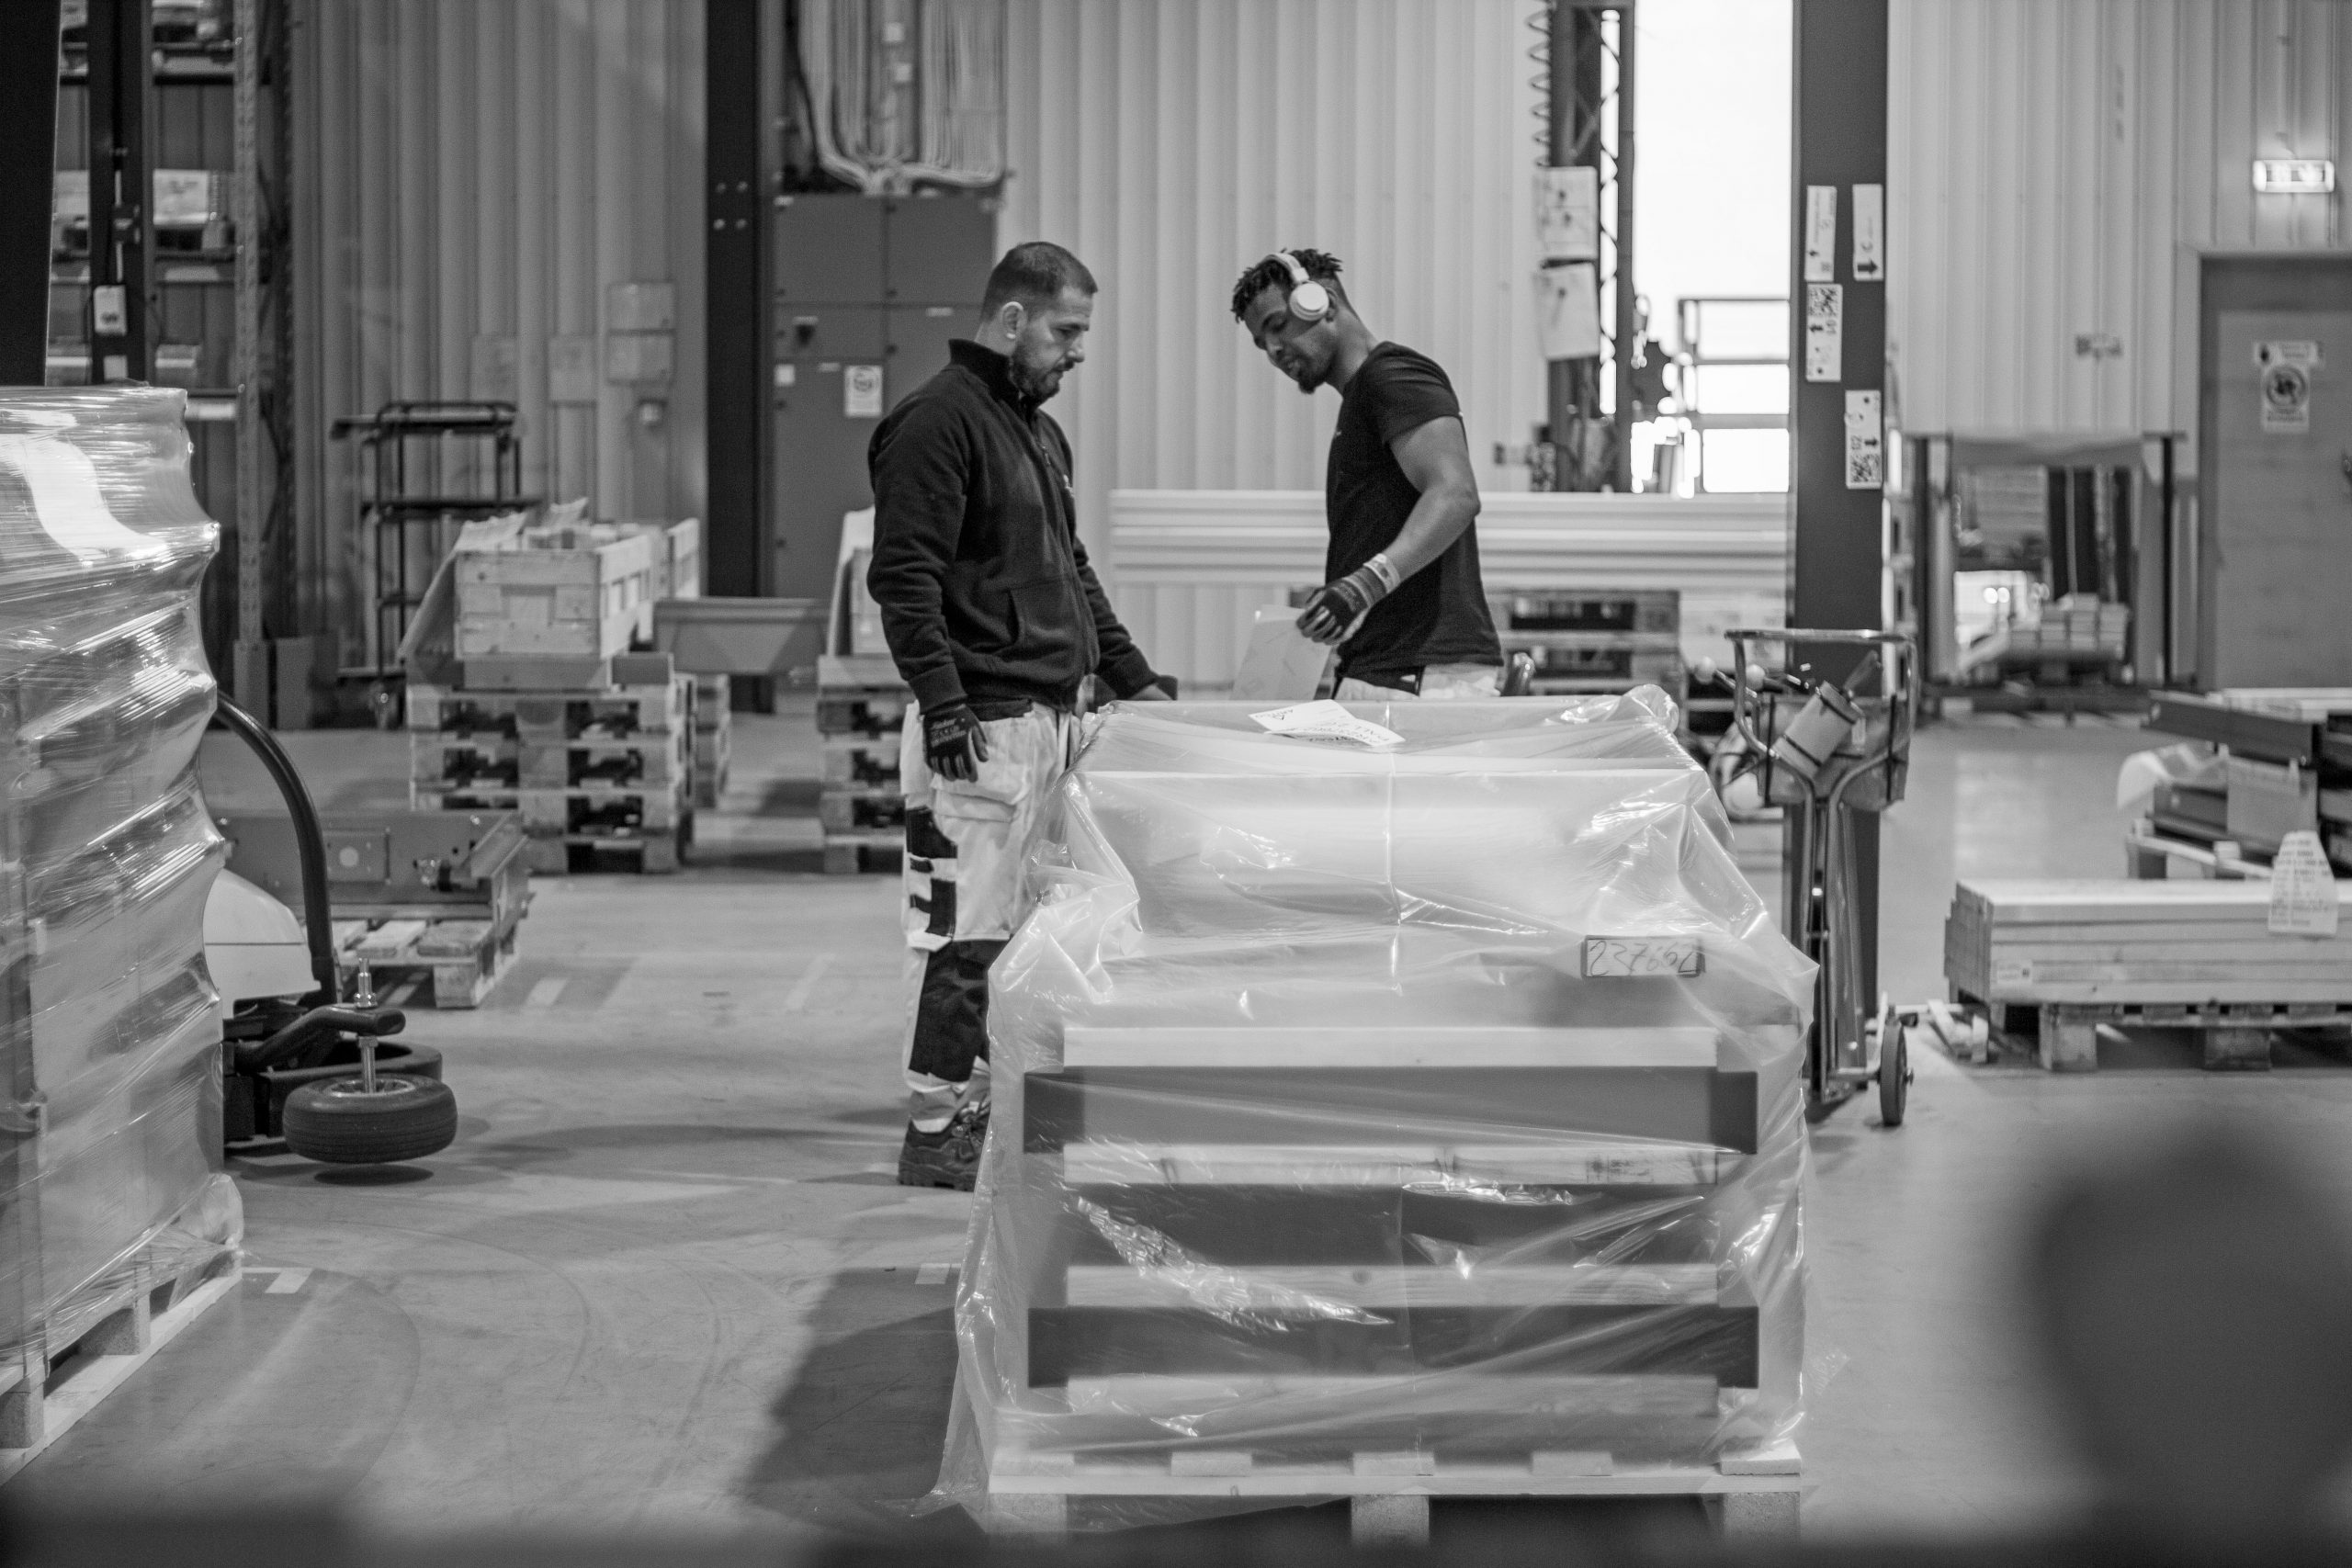 Black and white photo of two men working in a production area